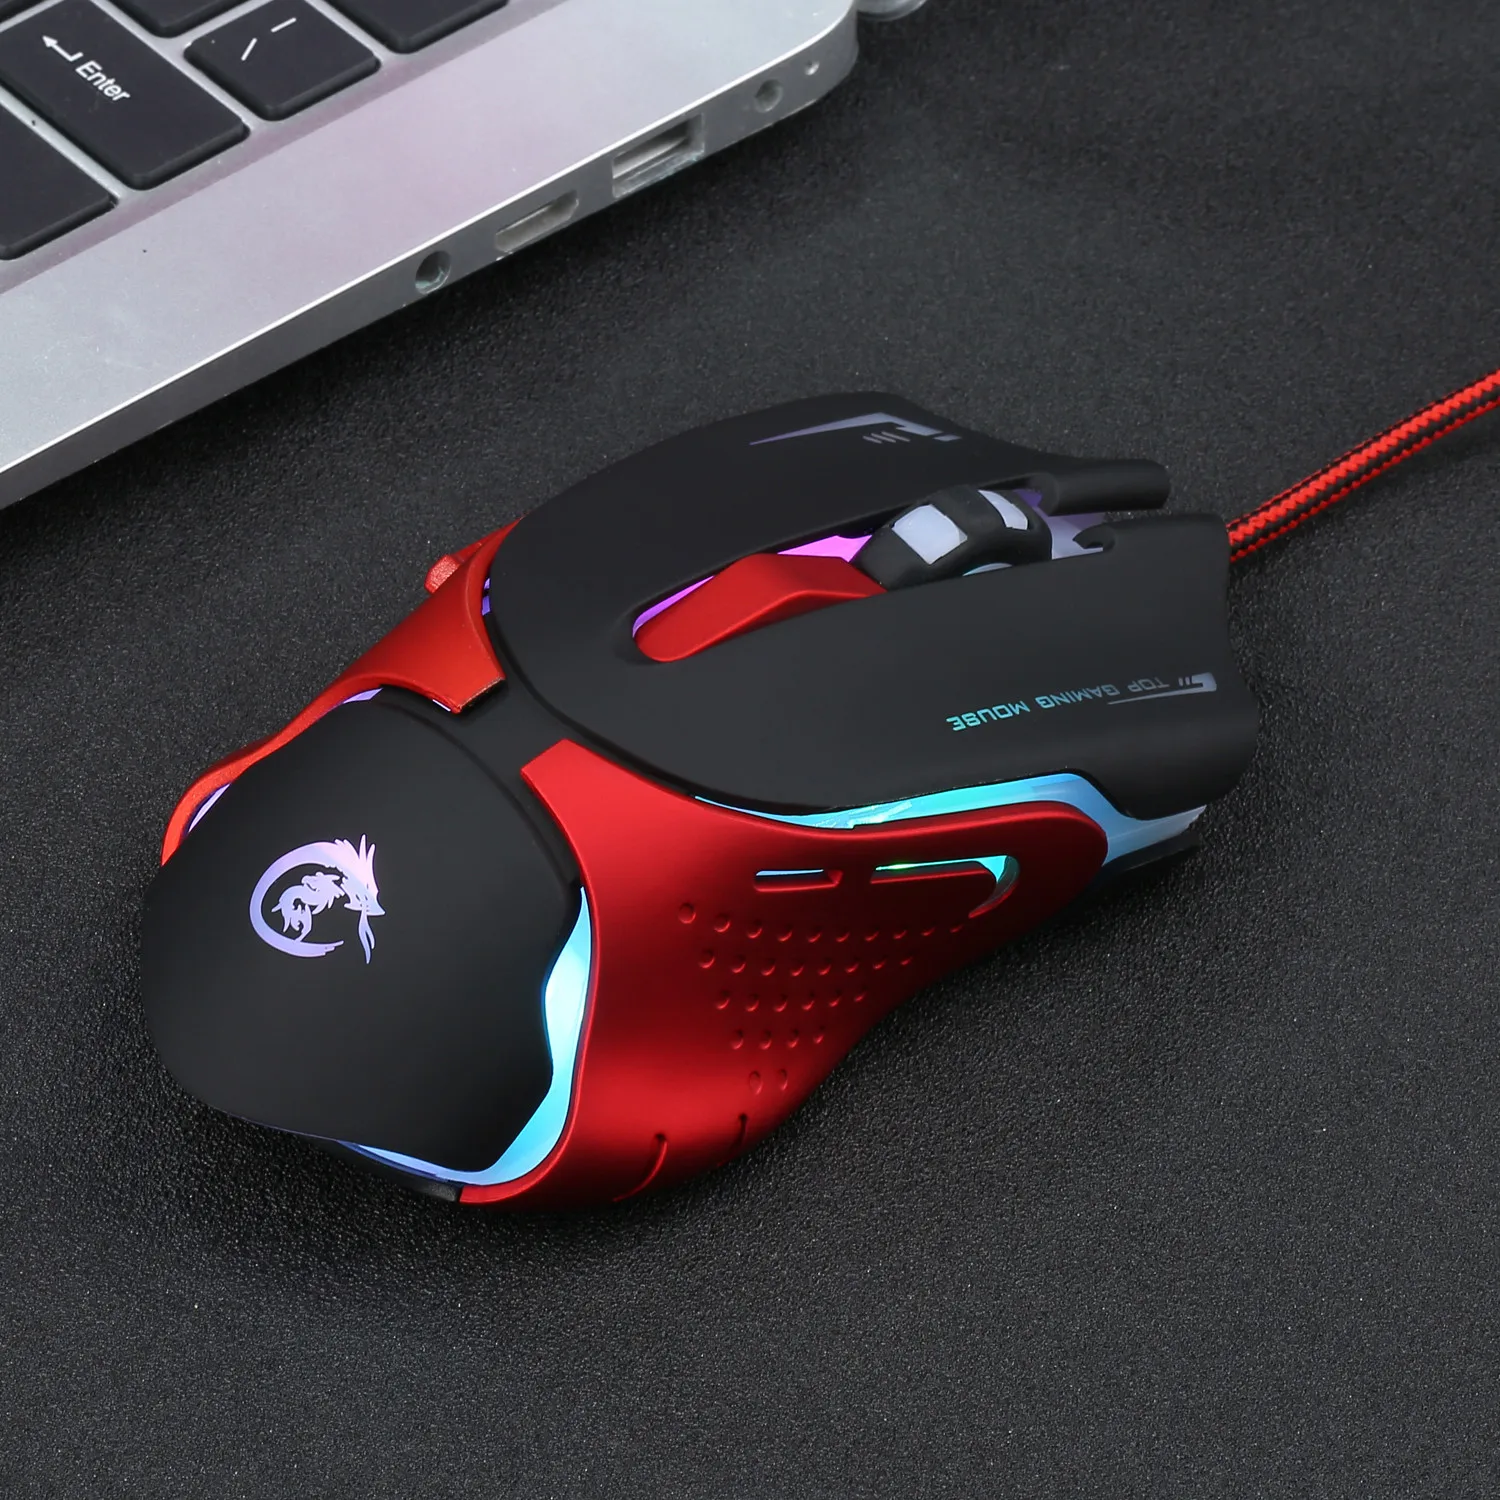 

mosunx Wired Mouse USB Optical Gaming Mouse 3200 DPI Pro Gaming Computer Mouse For Laptop PC Game 1023#2